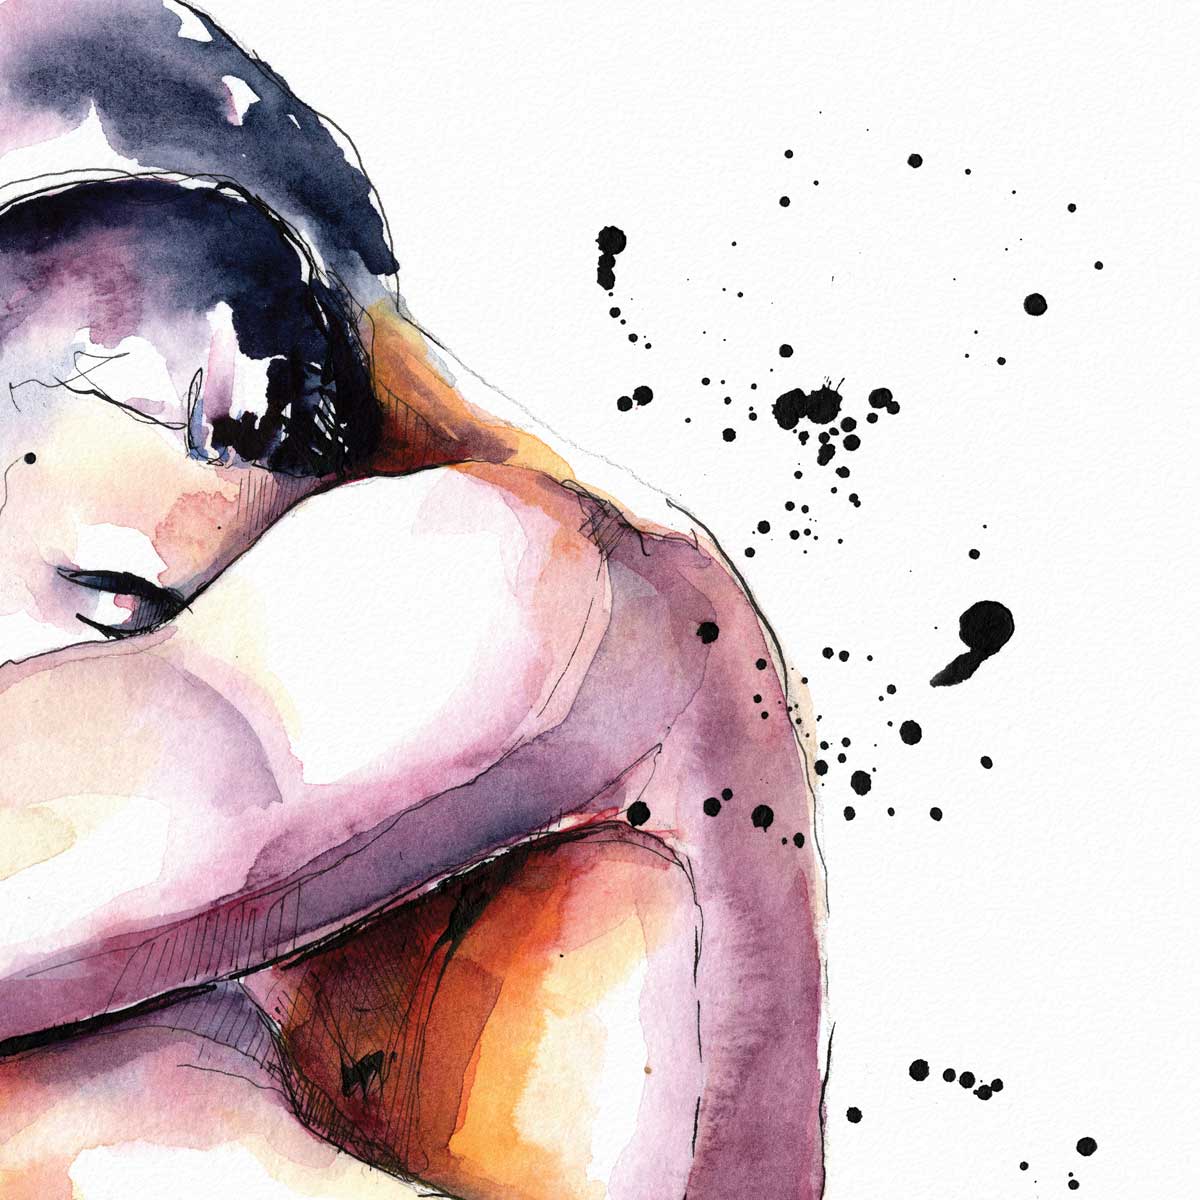 You Are Enough - Two Men in Tight Embrace - Ink and Watercolor - Giclee Art Print